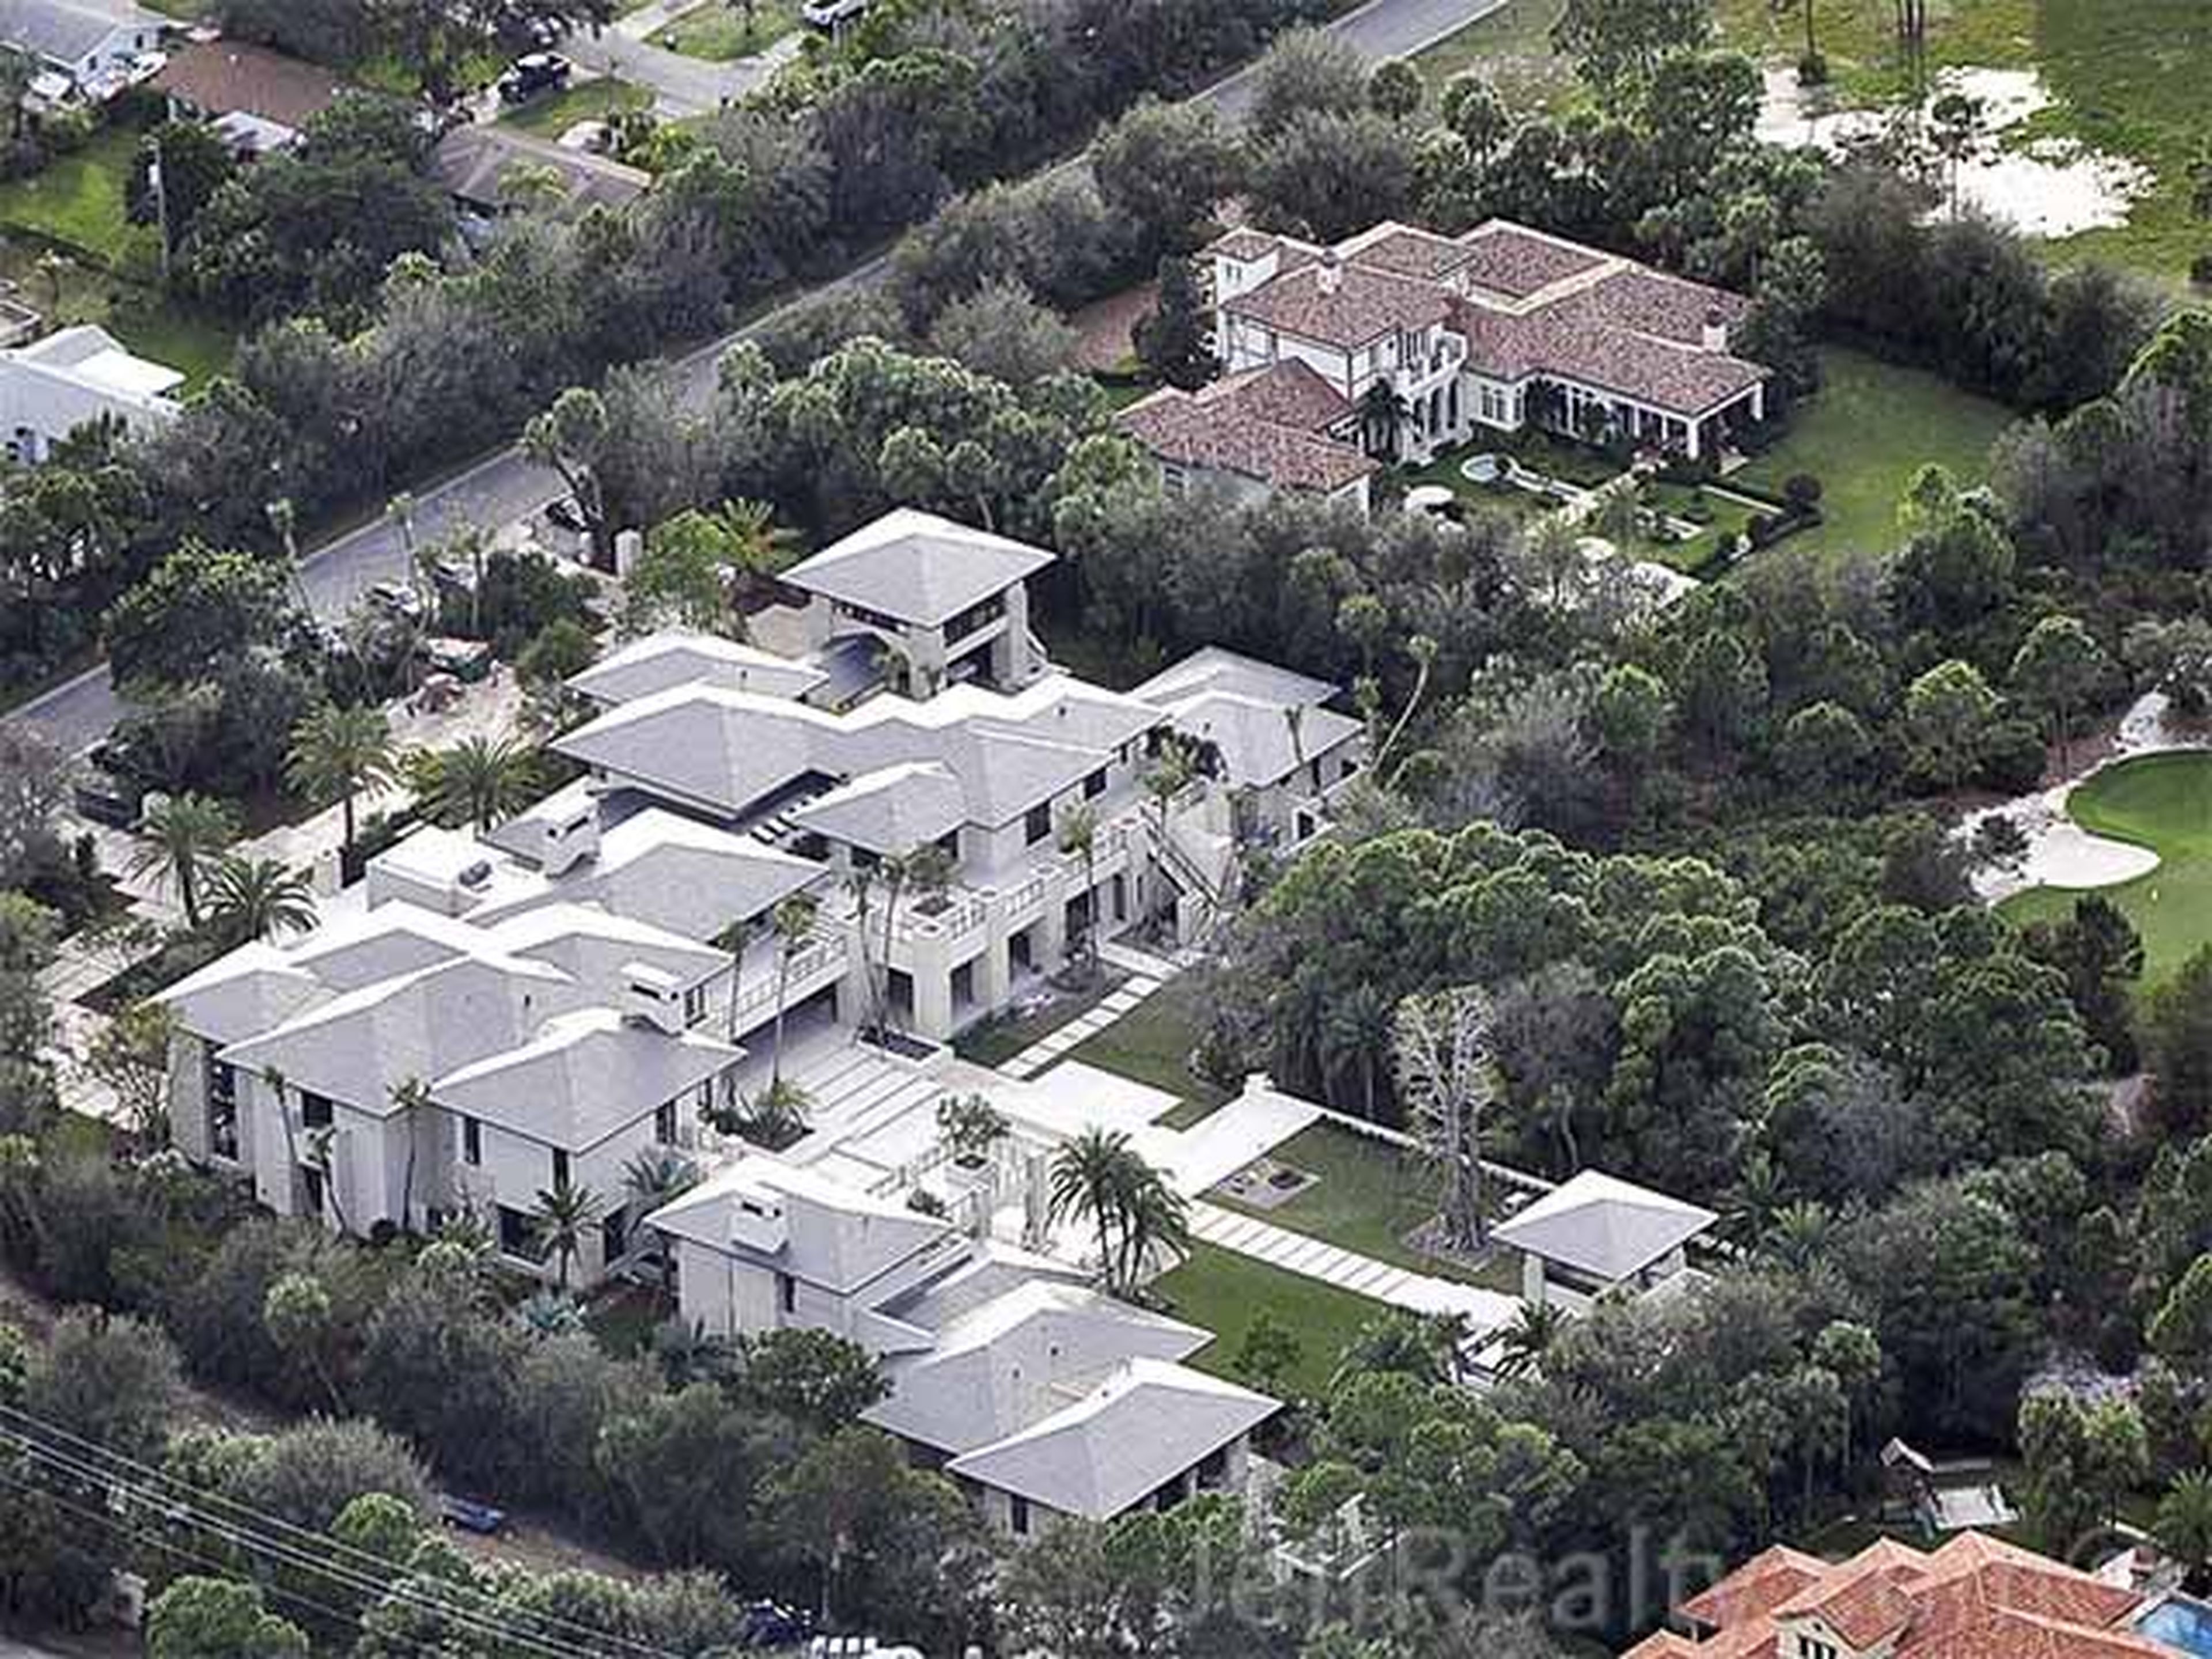 Jordan also reportedly bought a house on a golf course in Jupiter, Florida, for $4.8 million in 2013 and spent $7.6 million on renovations.